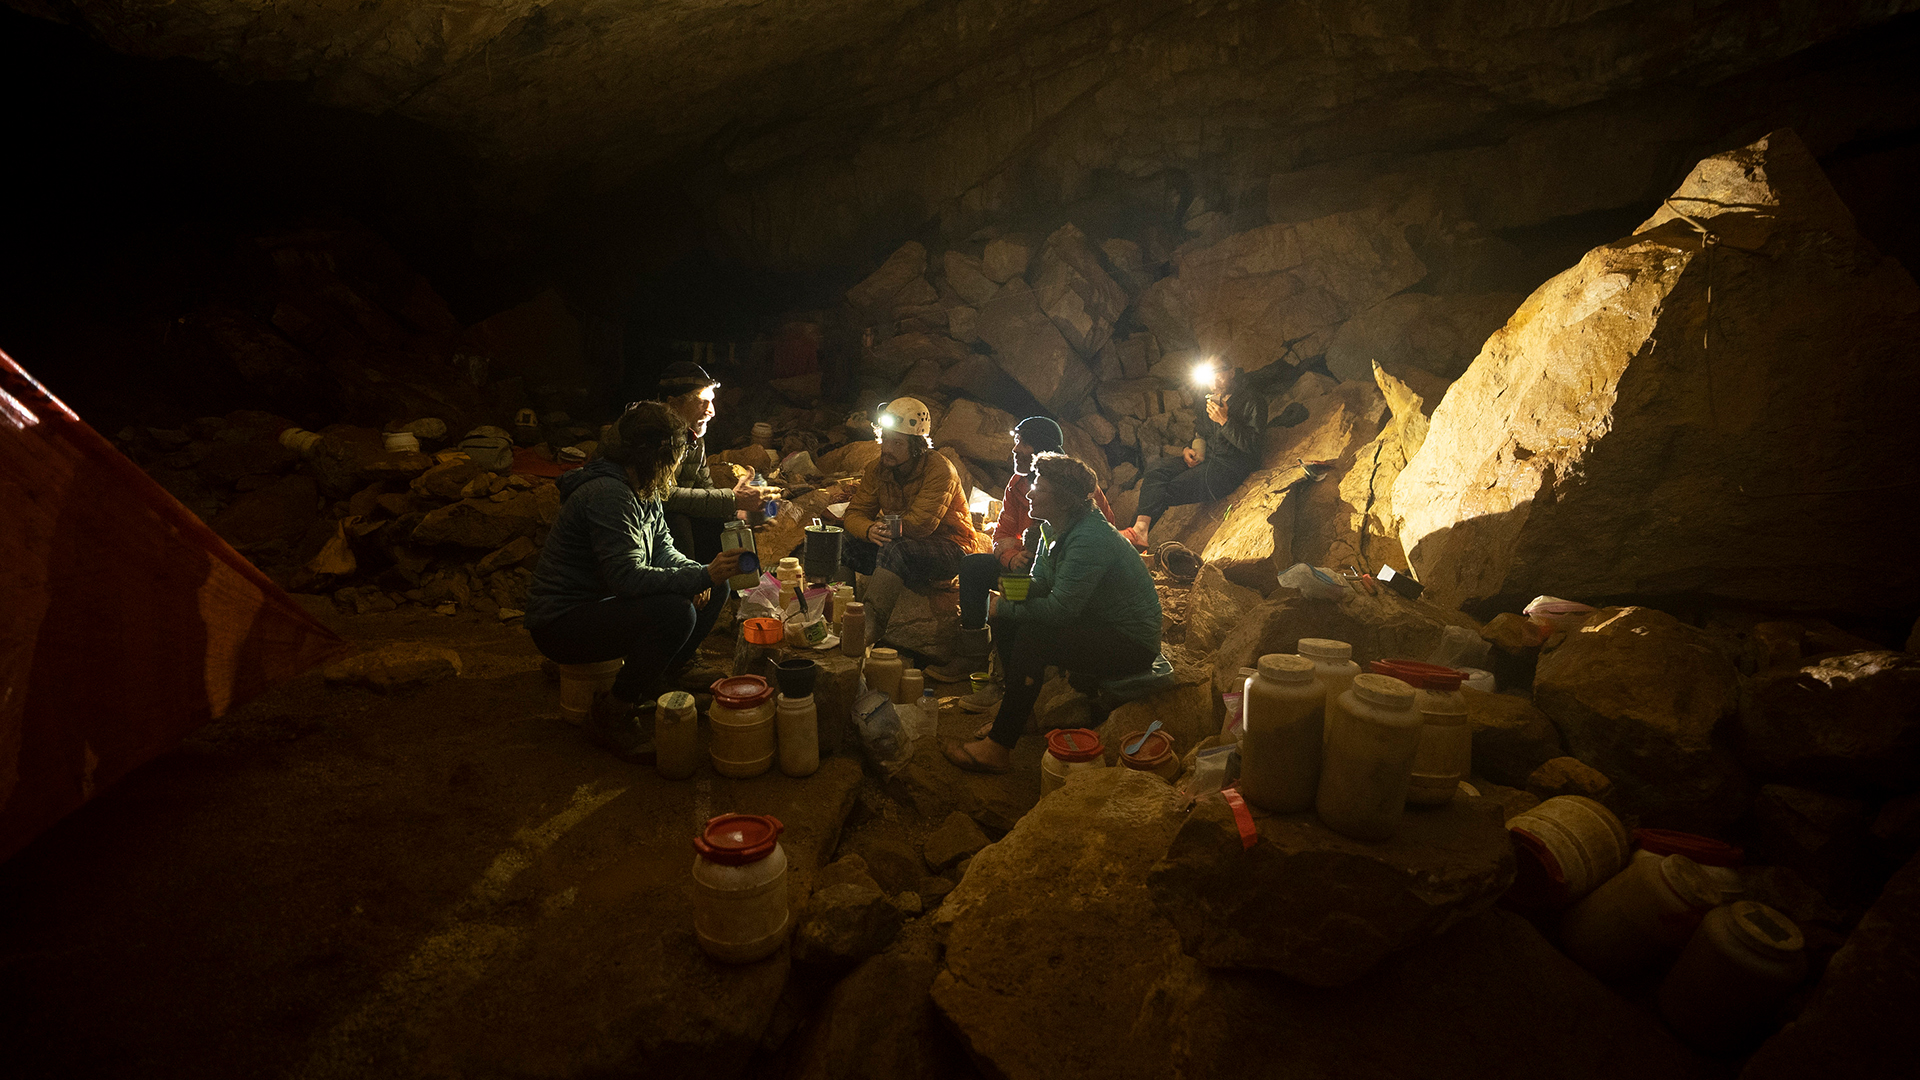 Team members eat a meal at one of the Cheve Cave camps surrounded by their gear and food packs.... [Photo of the day - June 2022]